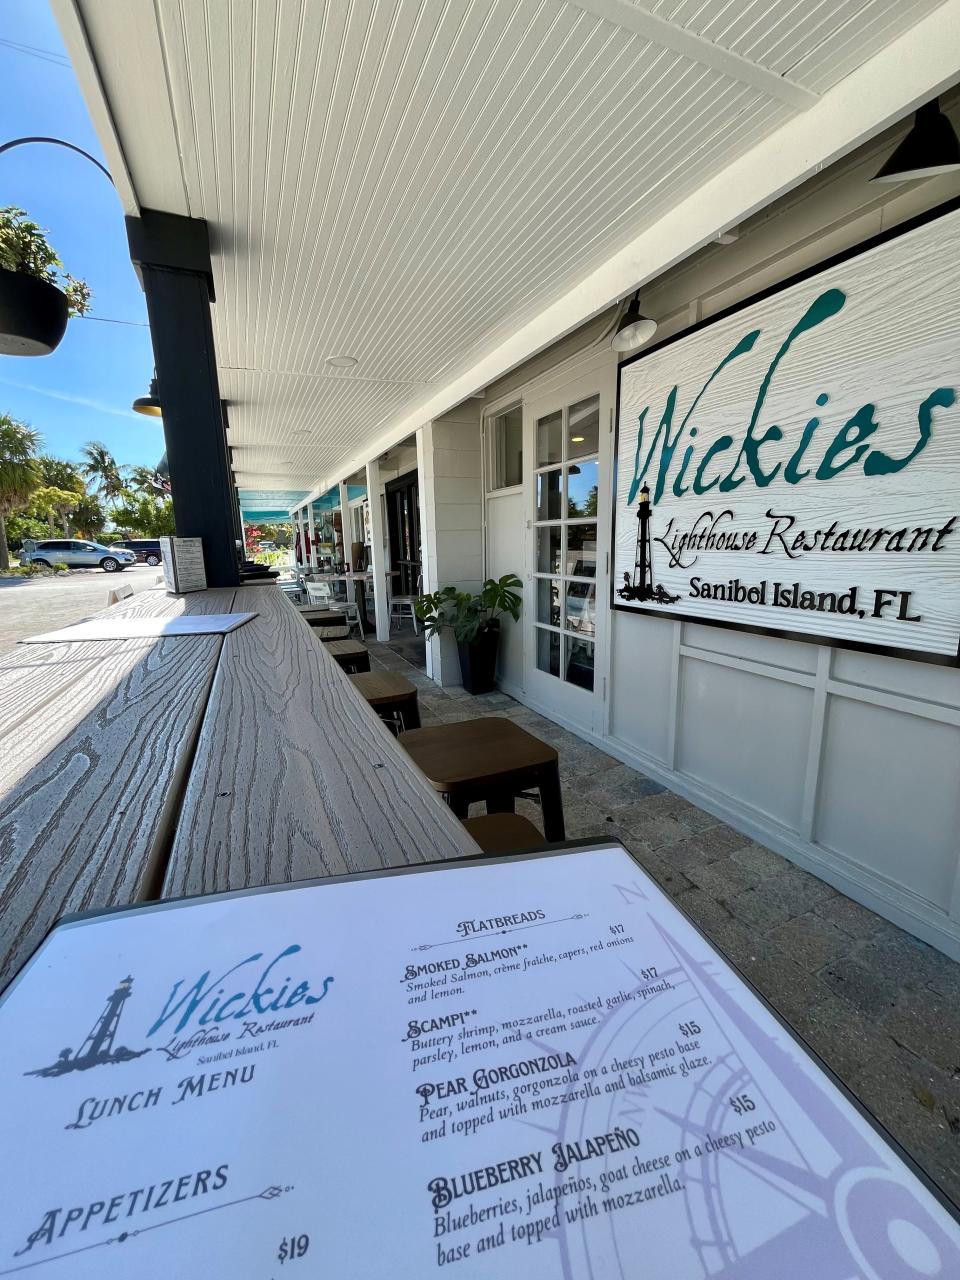 Have drinks along the outdoor rail at Wickies Lighthouse on Sanibel.